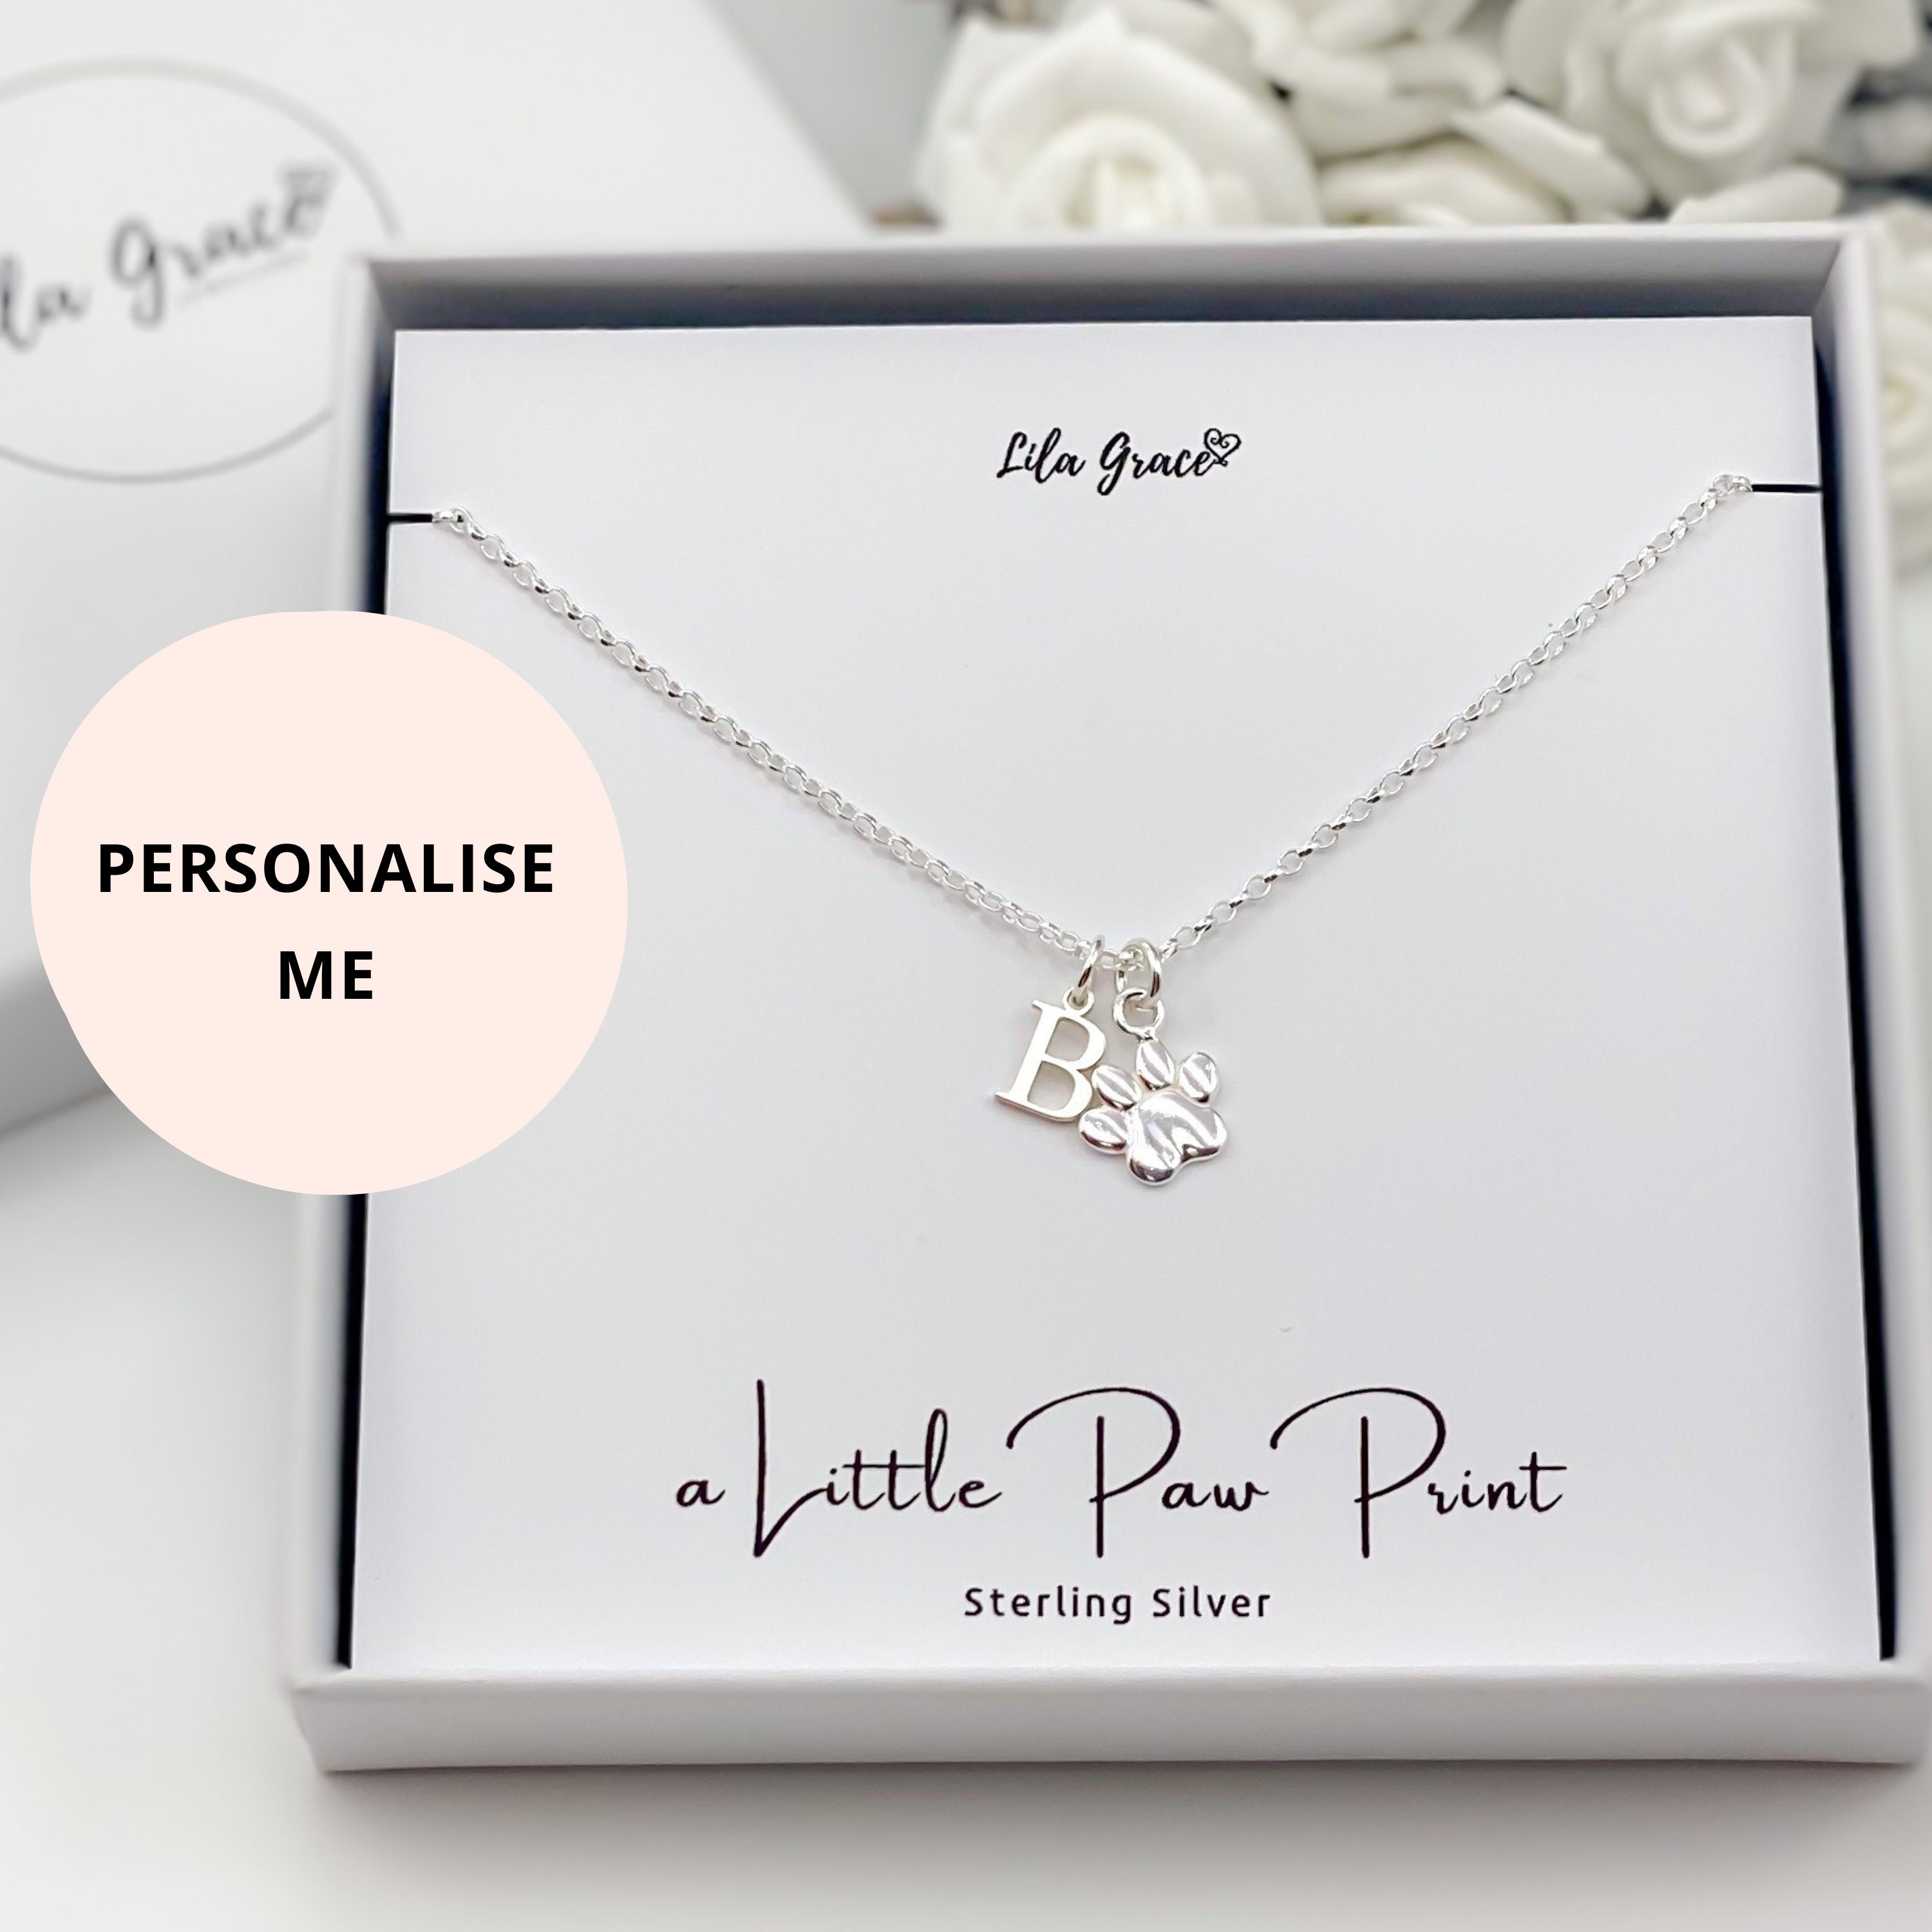 preiswert PERSONALISED Sterling Pet Necklace Gifts Memorable - Etsy Cute Necklace Silver Dainty Denmark Womens Puppy Thoughtful Paw Print Gifts Paws Girls Paw